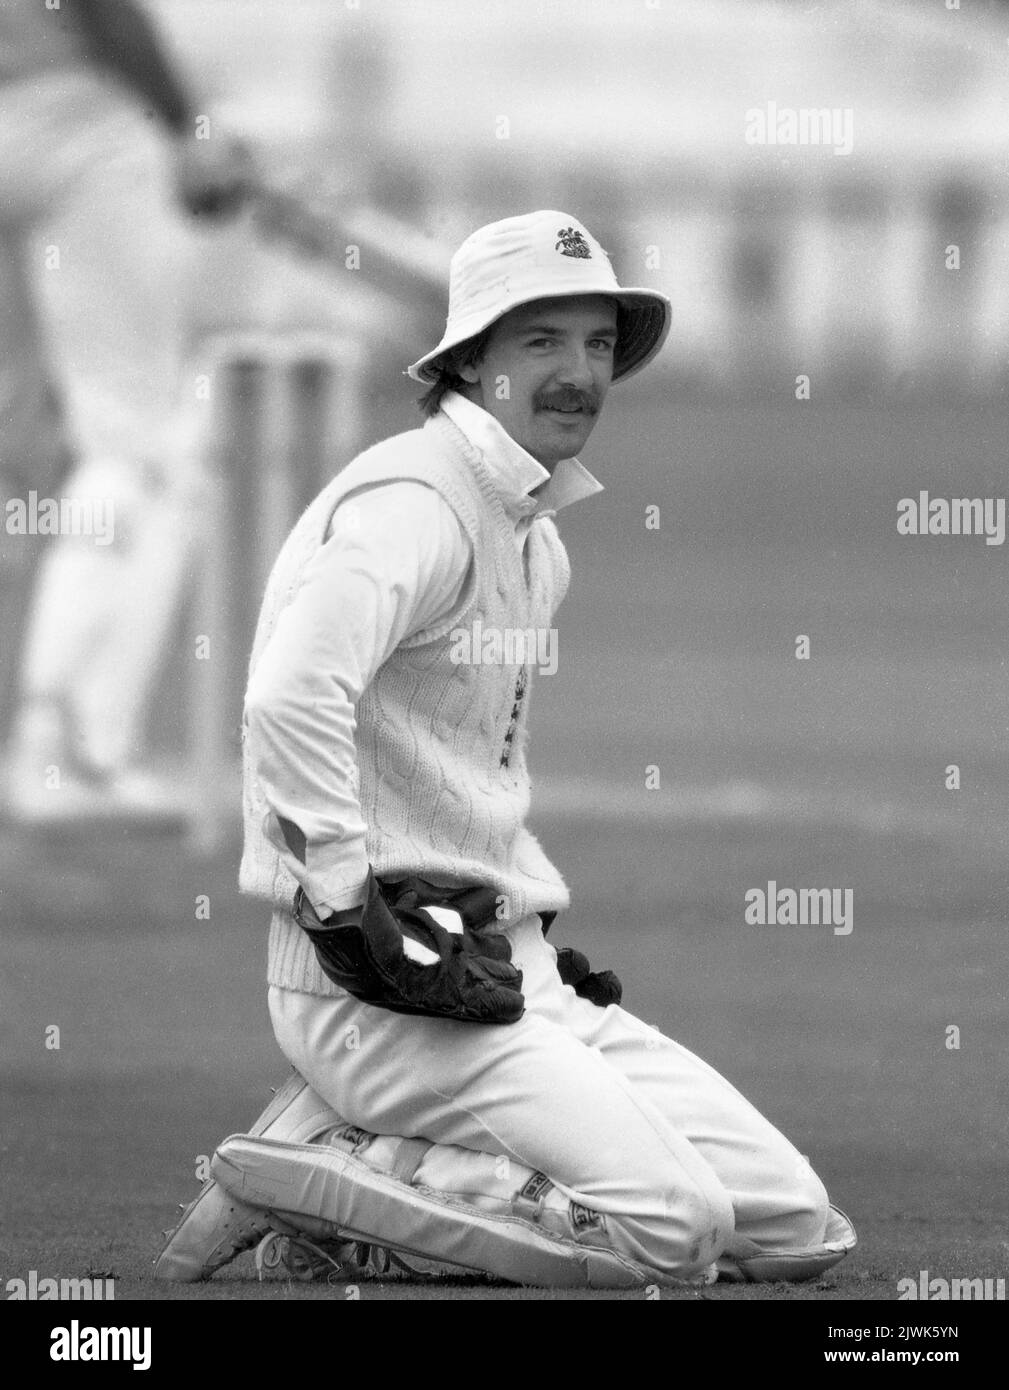 Cricket 2nd Test England versus NewZealand, Lords, 25 June 1990 England wicketkeeper Jack Russell  Photo by Tony Henshaw Stock Photo